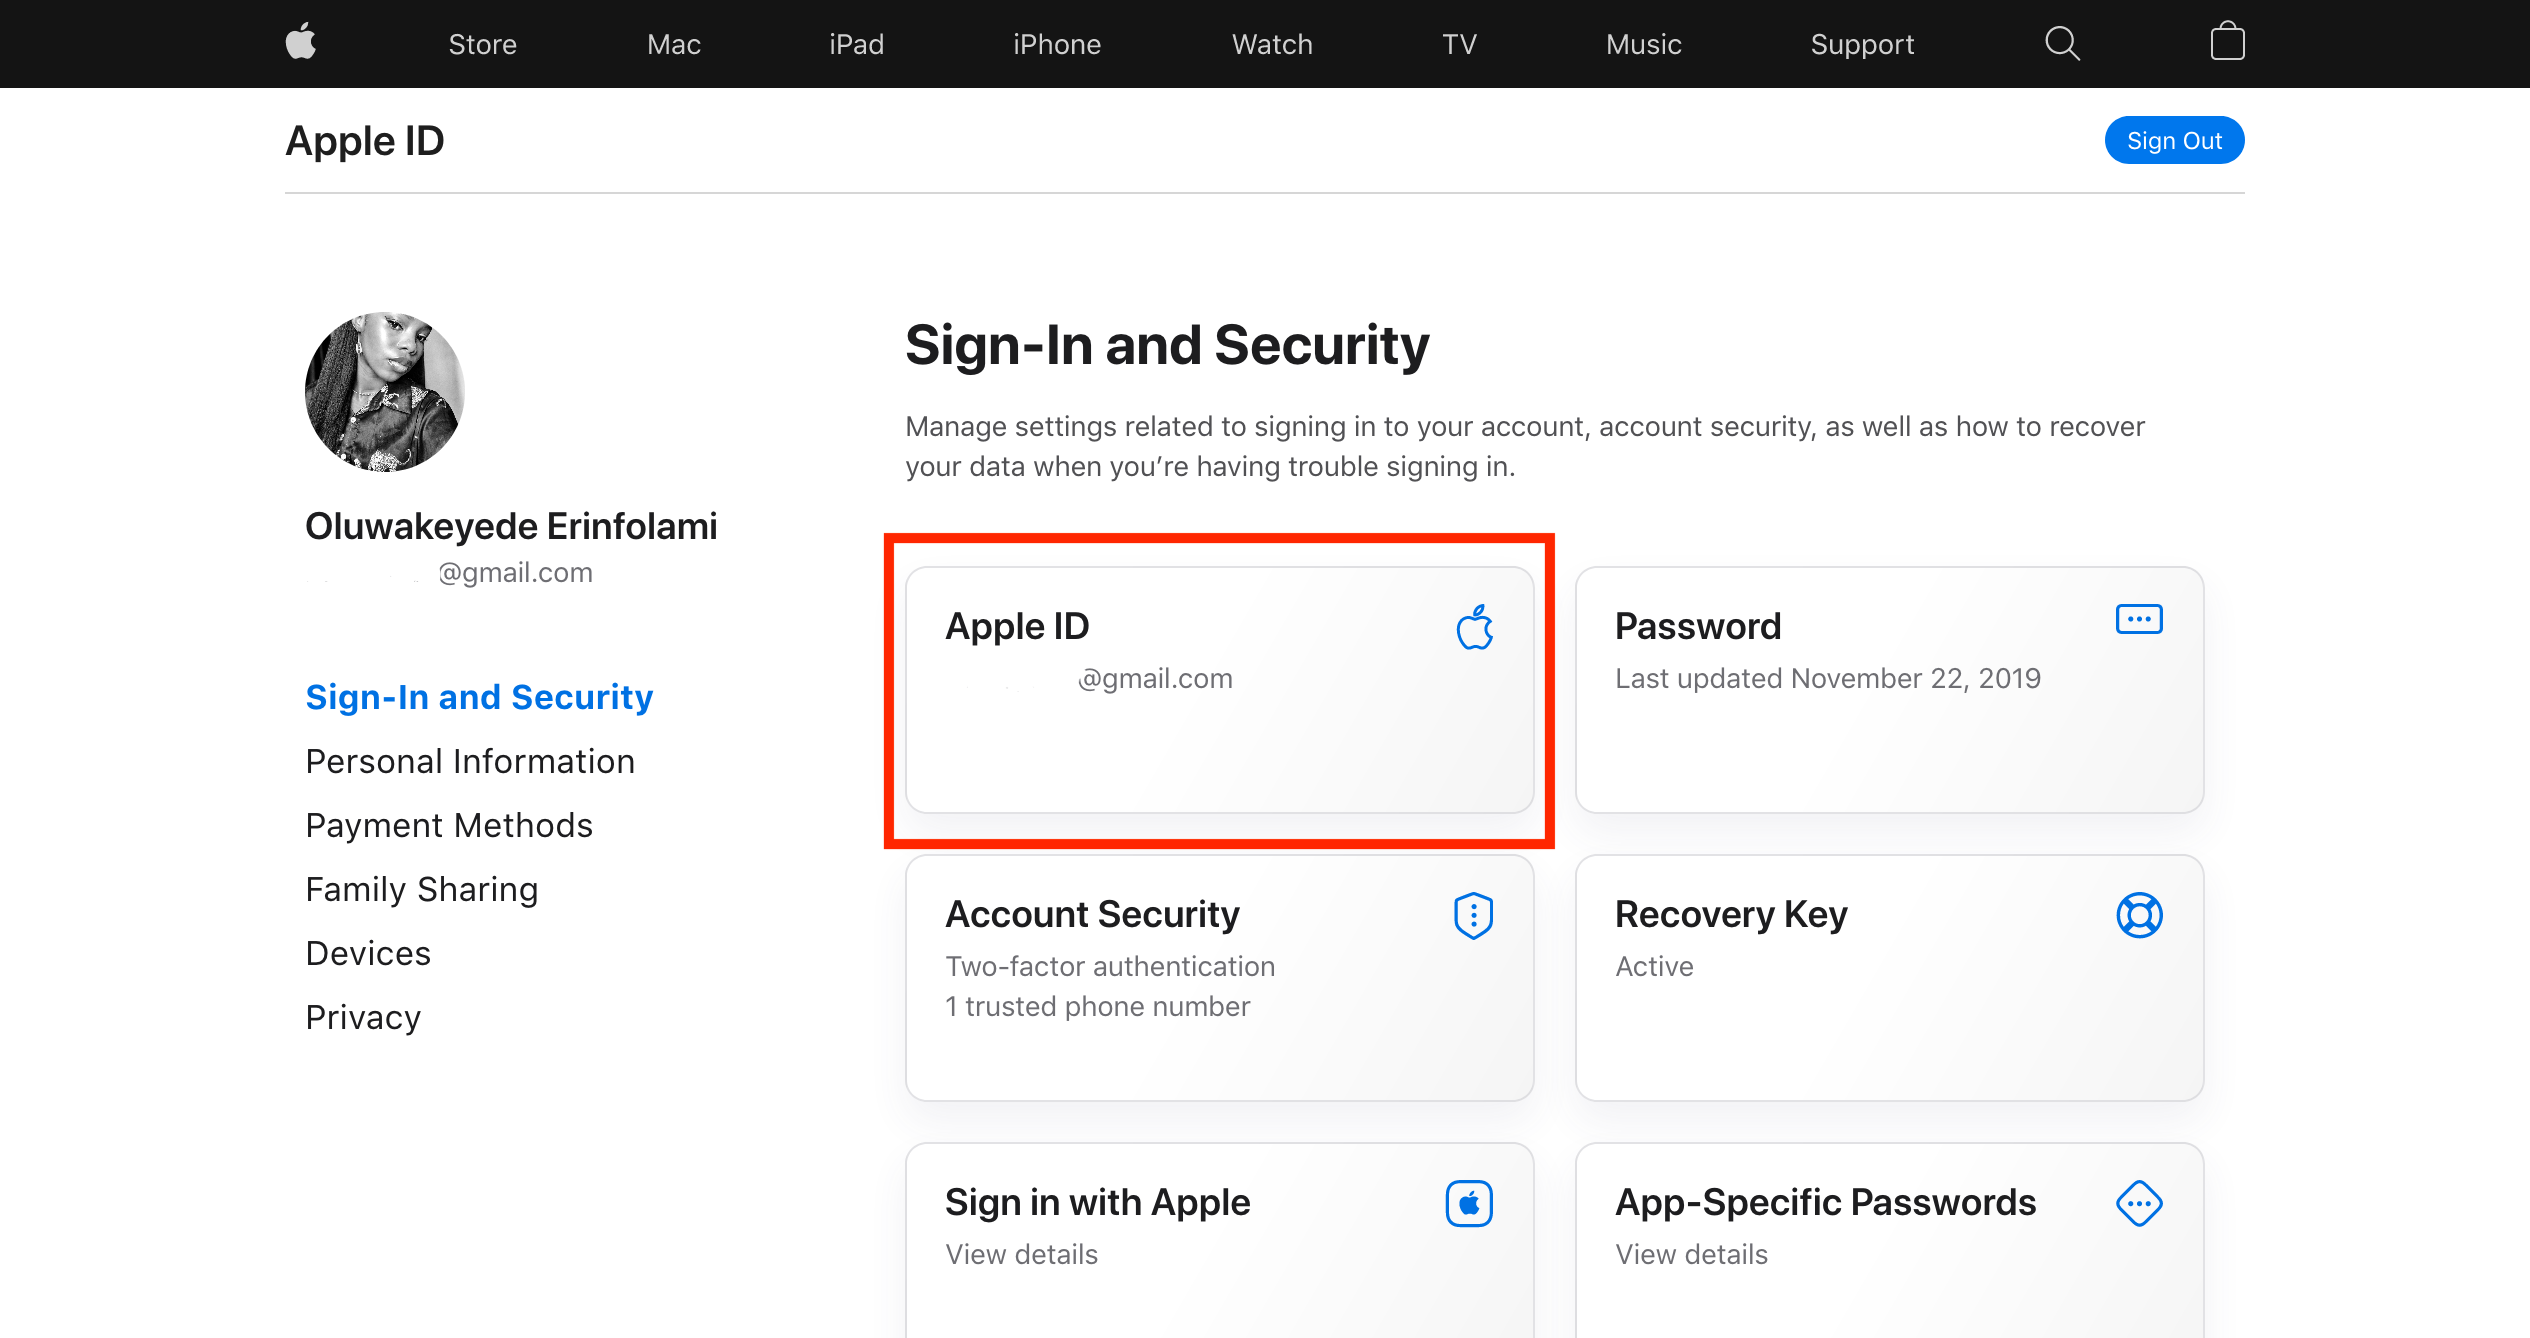 Apple ID Sign in and Security page